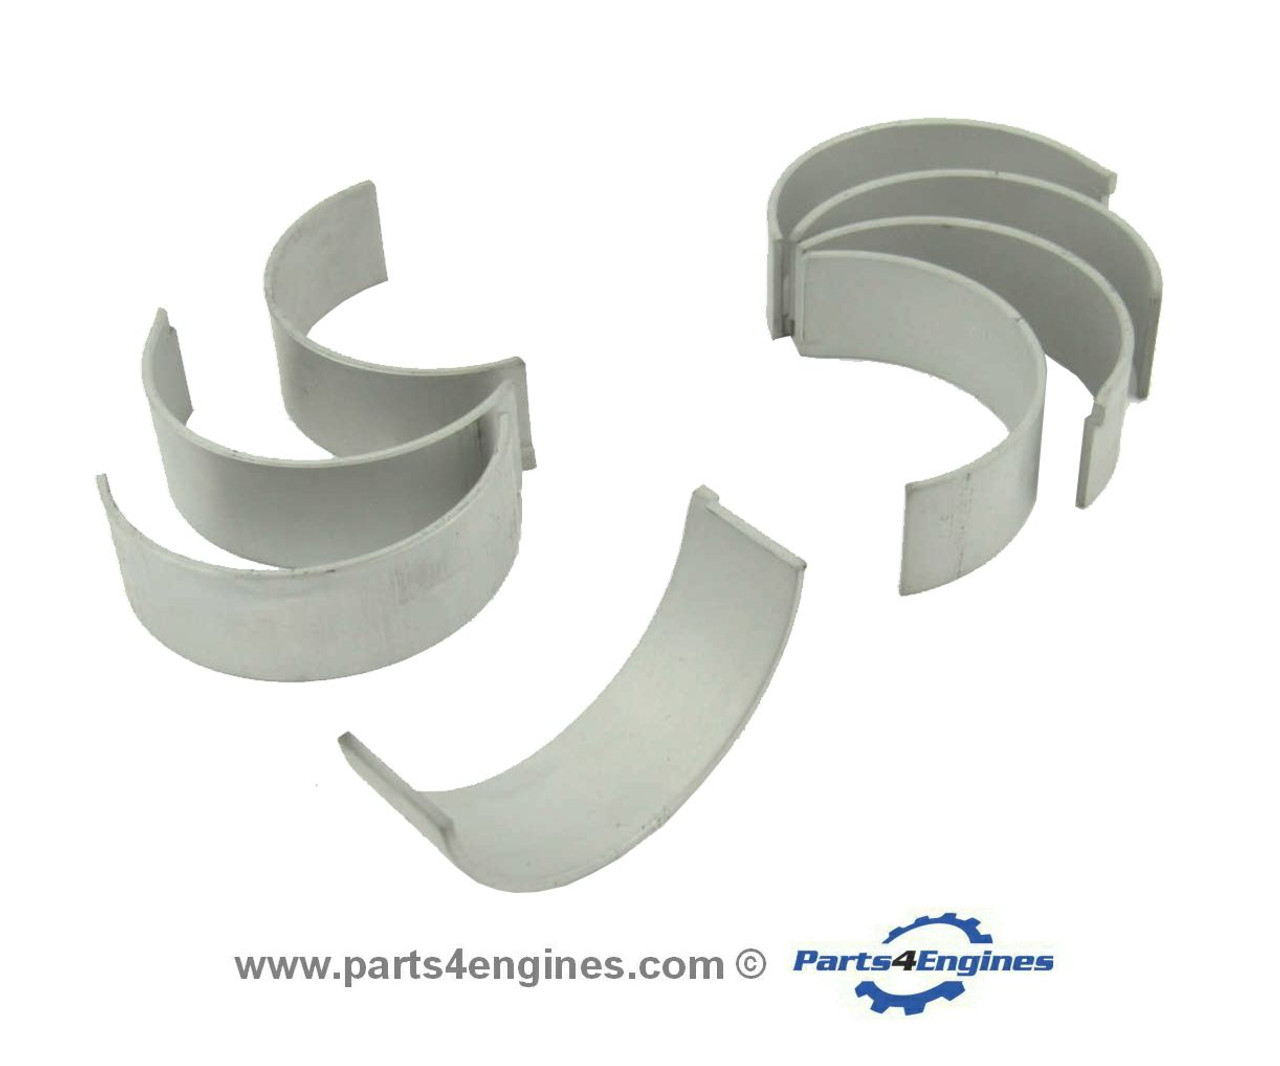 Perkins 704.30 & M65 Connecting rod bearing set,  from parts4engines.com